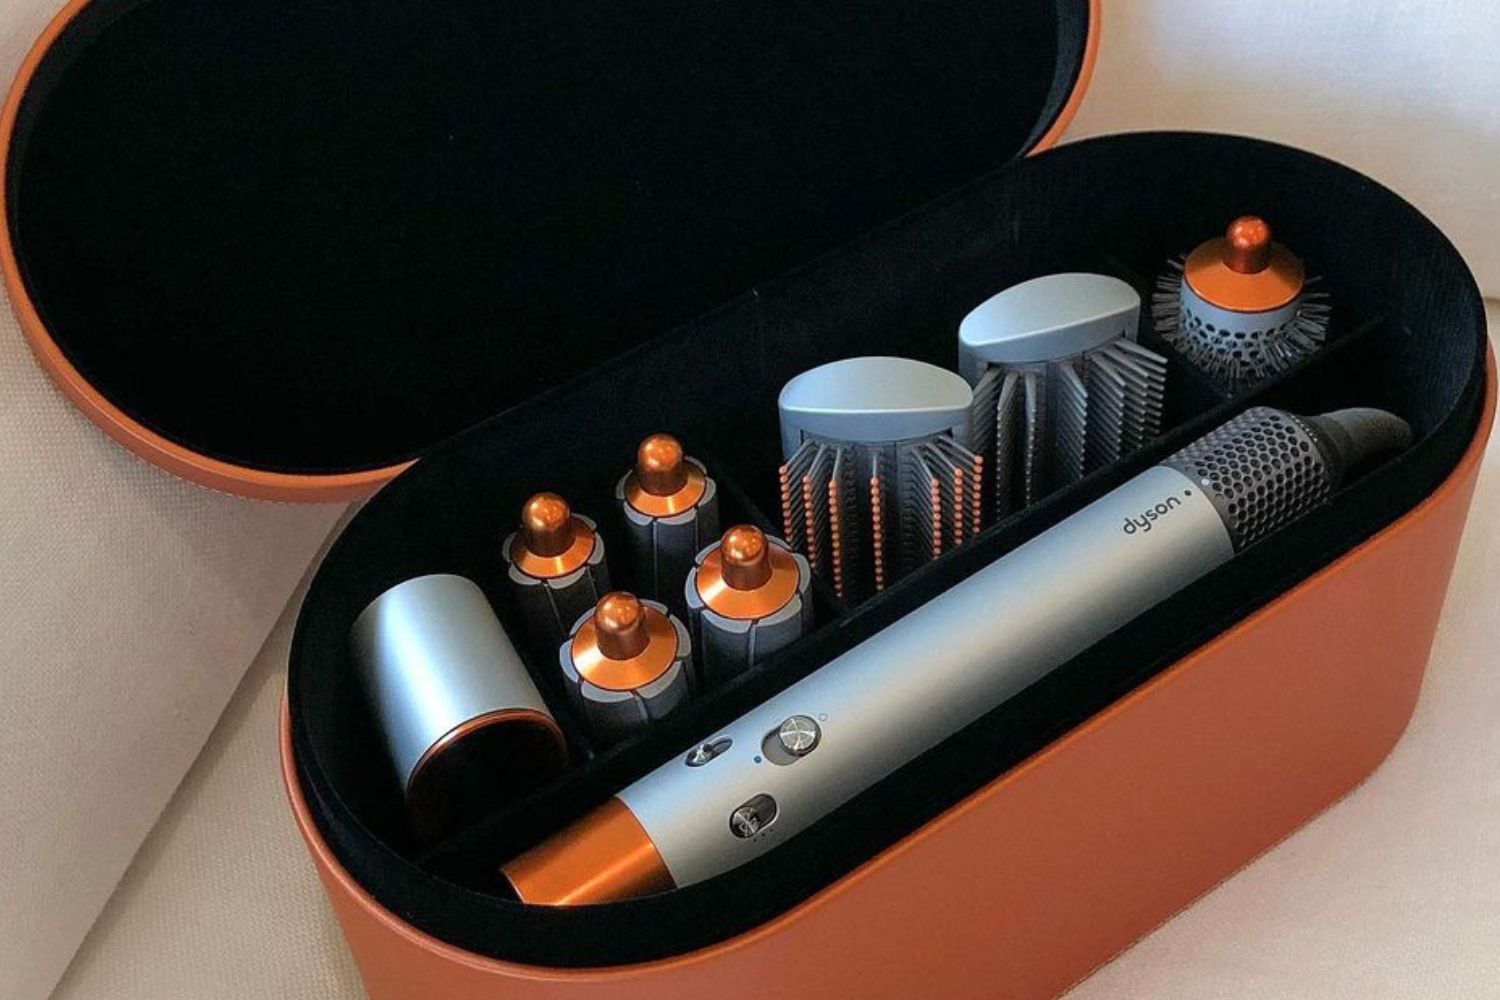 The full set Dyson Aiwrap with five attachments: smoothing, curling barrels, blowdry brush and the soft and firm smoothing brushes in the orange/copper shade with display case. 